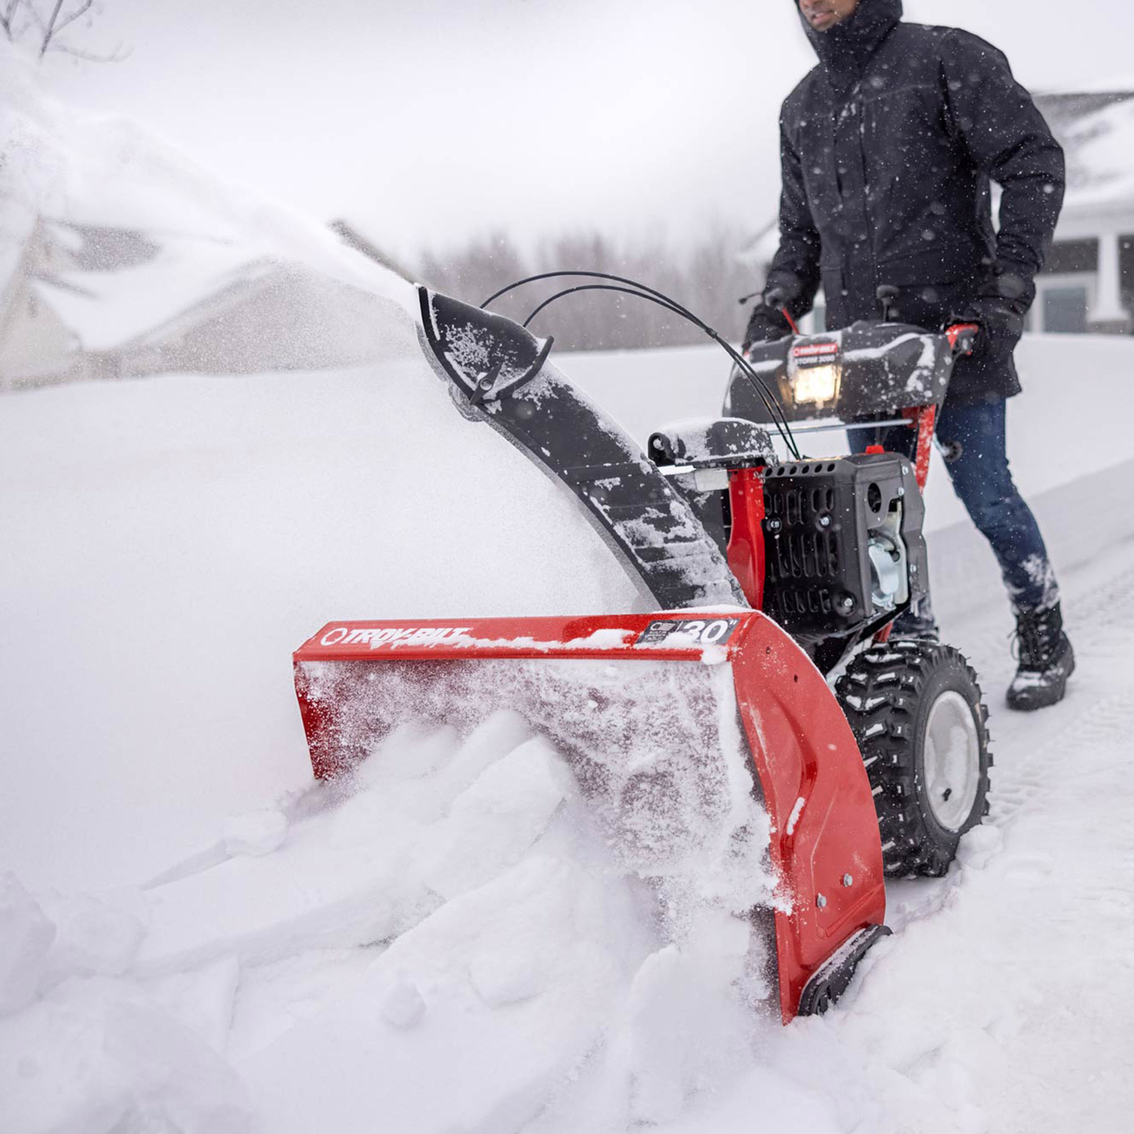 Troy-Bilt Storm 3090 2 Stage 30 in. Snowthrower - Image 8 of 8